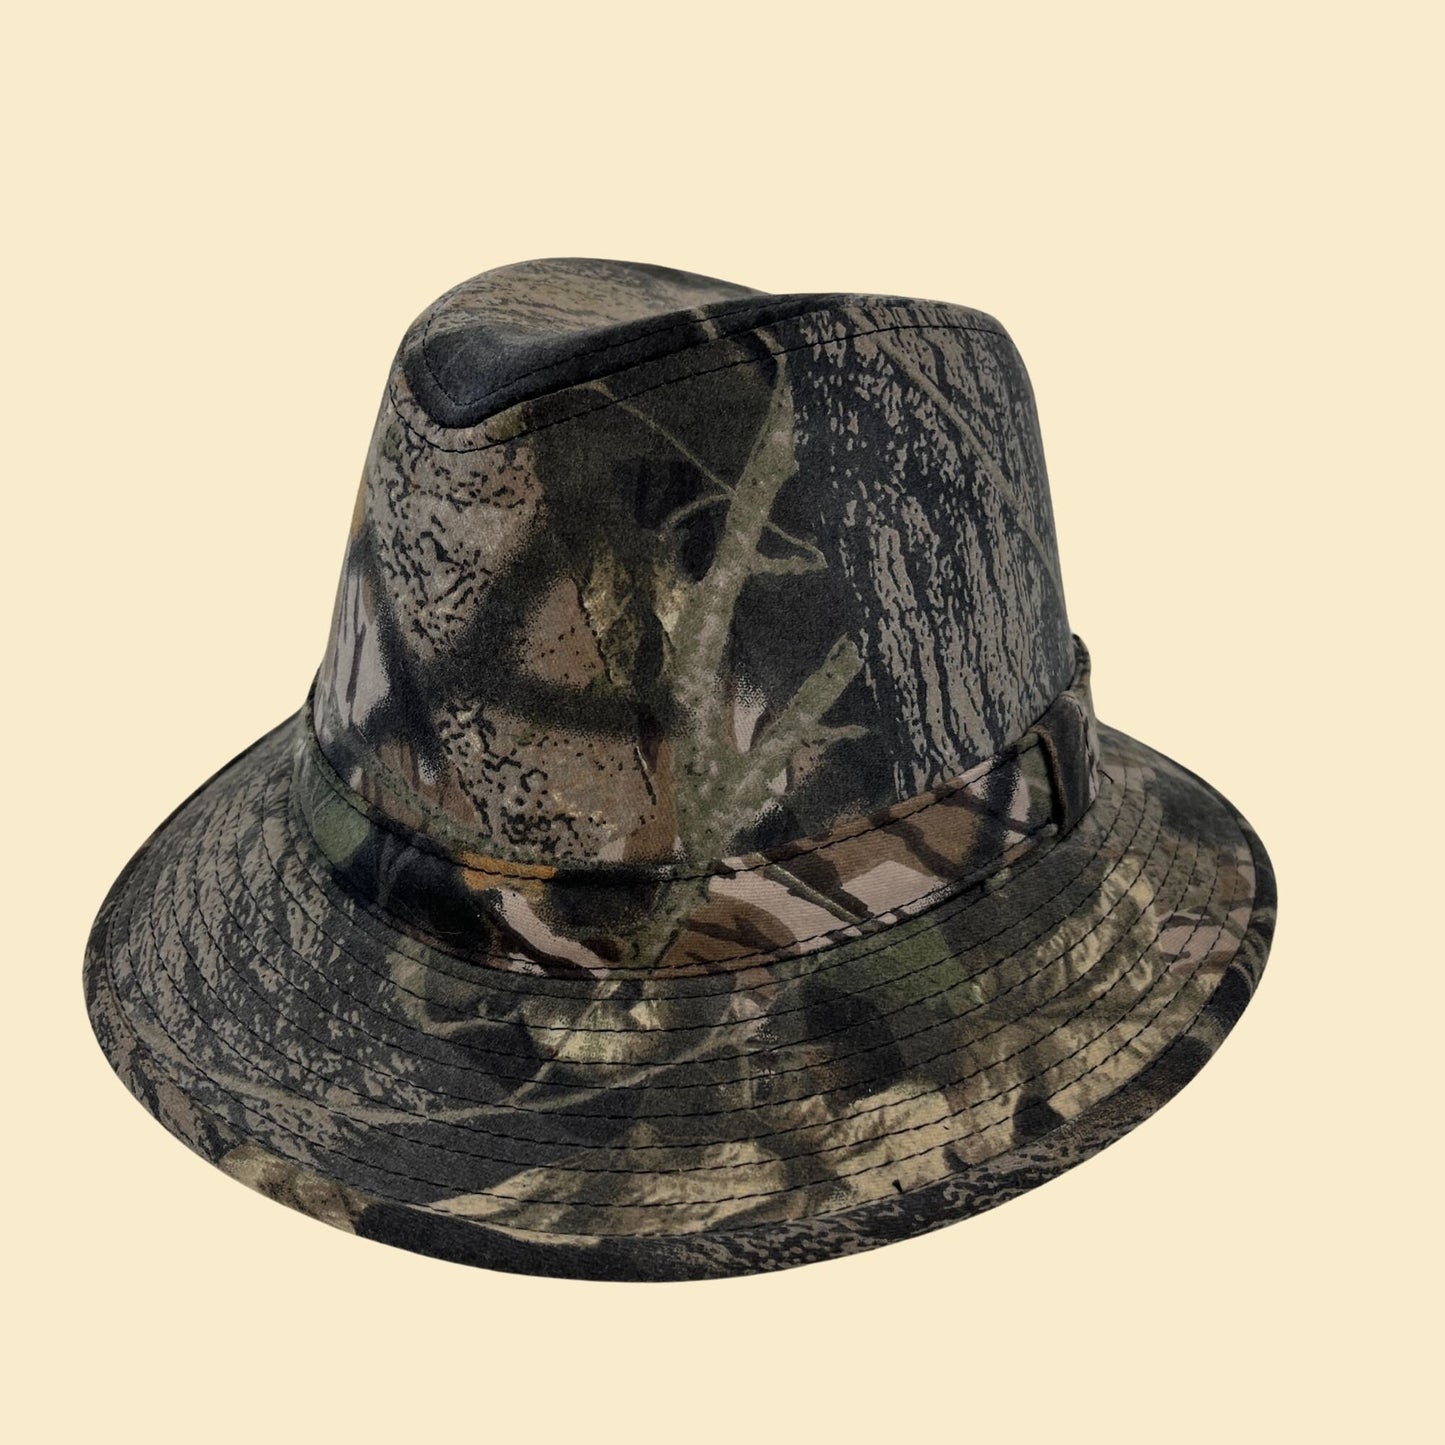 90s camouflage hat, vintage hunting hat, 1990s brown & green camo bucket hat